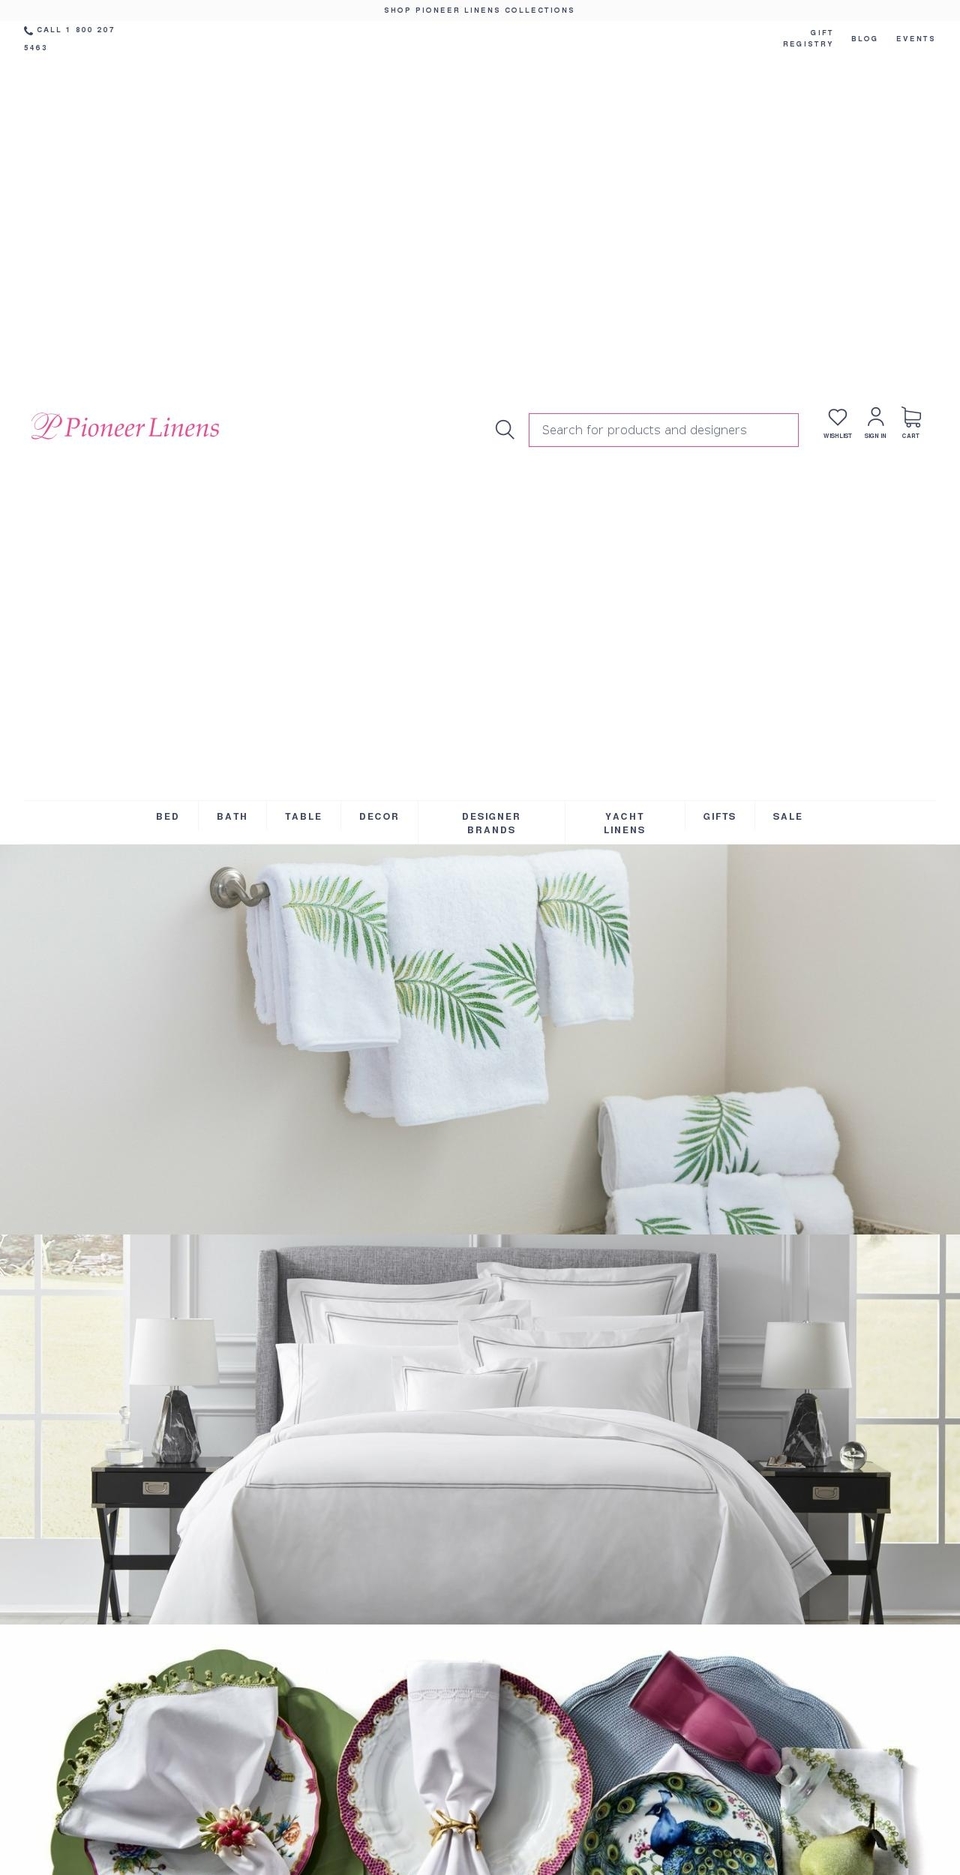 Buko Shopify Theme - Products Consolidation Shopify theme site example andreaslinens.com